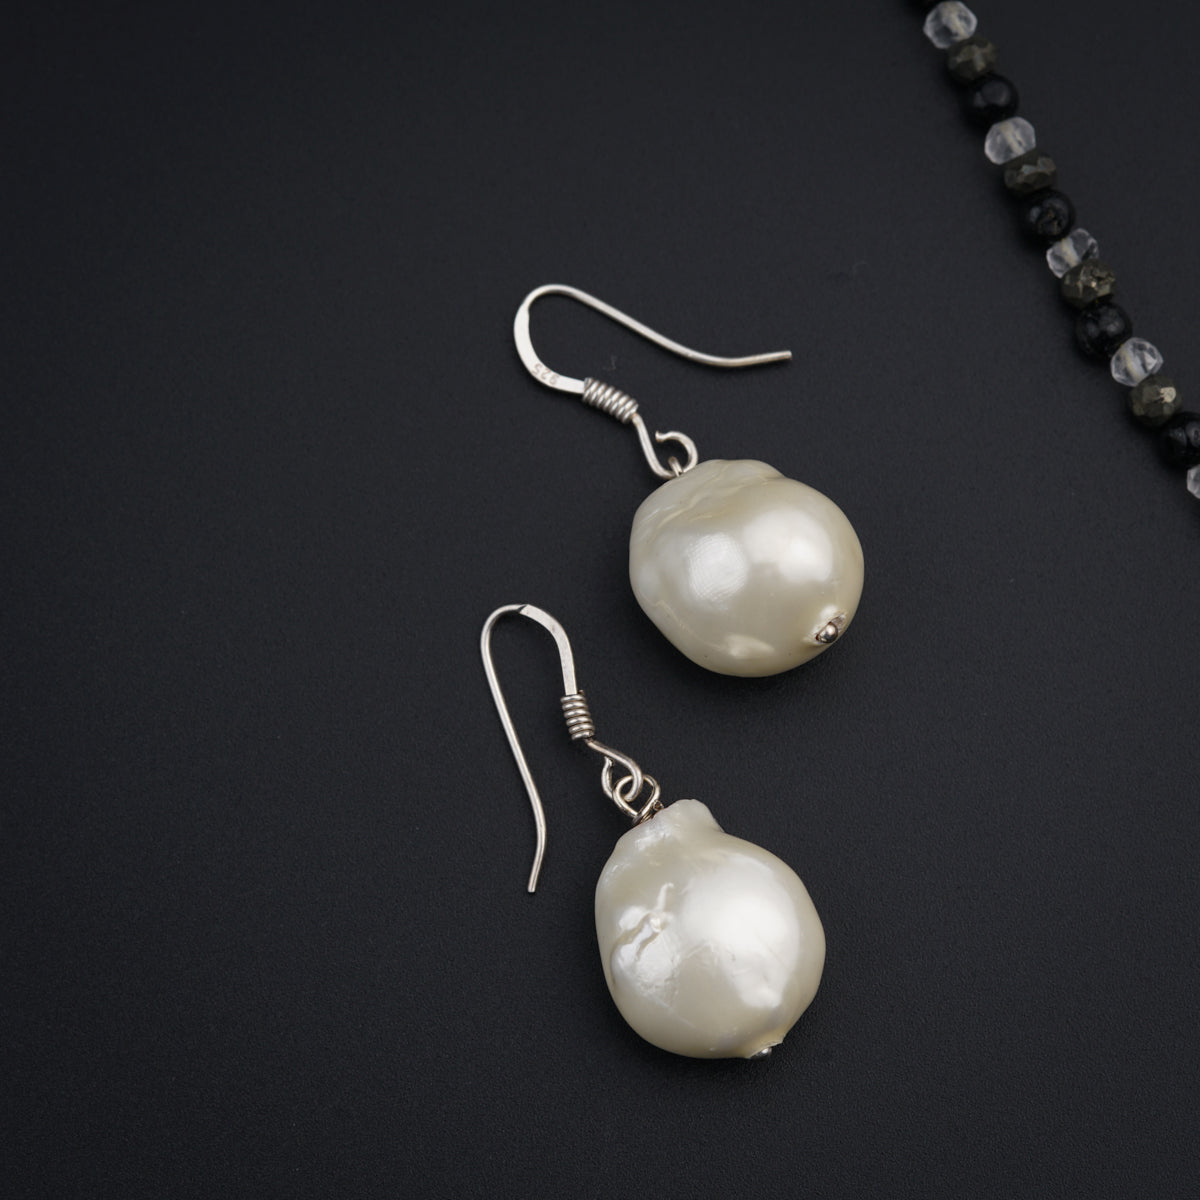 a pair of white pearls are hanging from a necklace